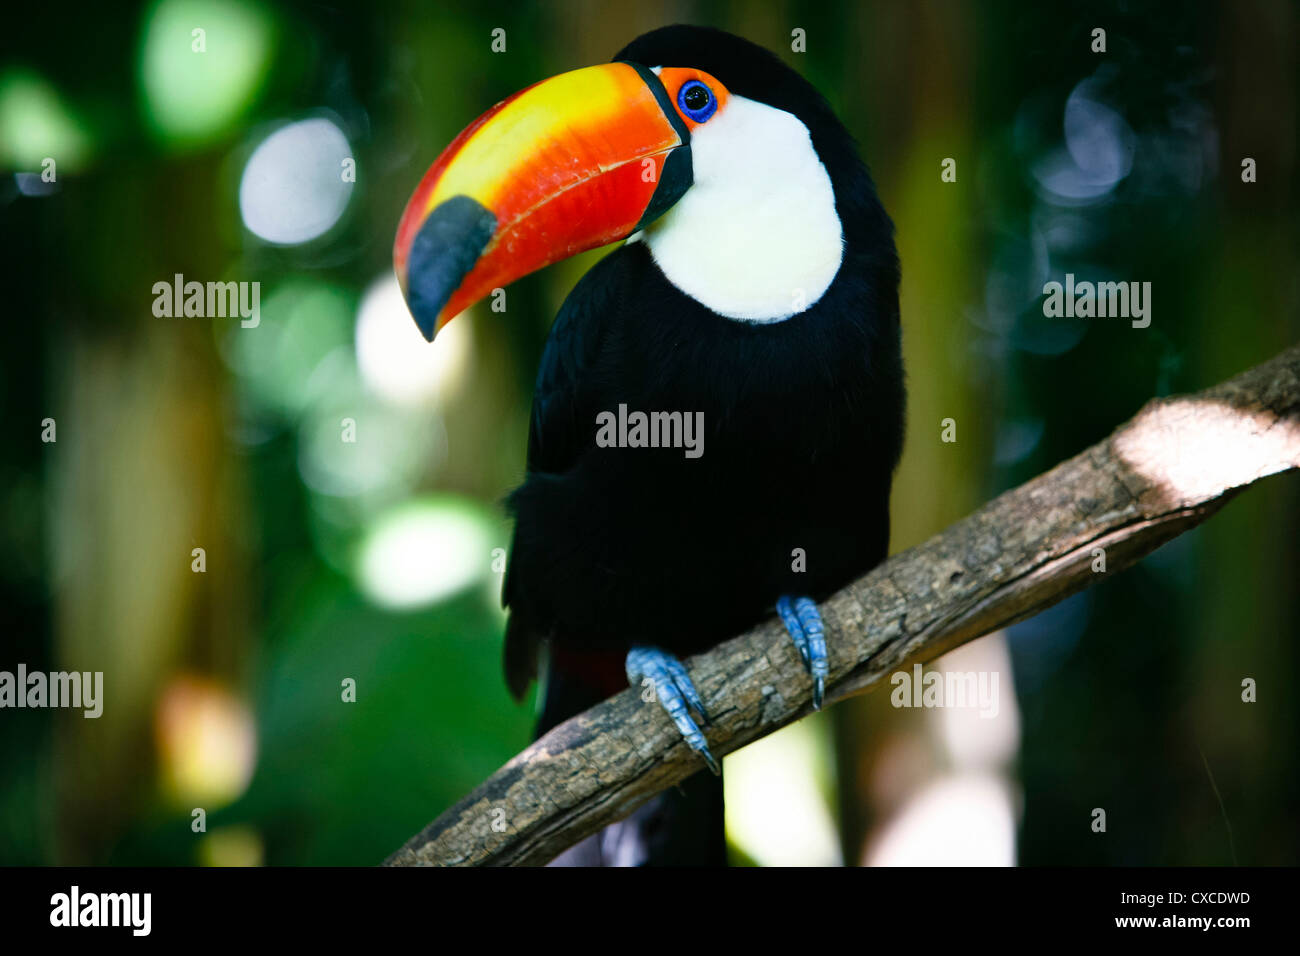 Toucan Bird at a forest in Iguazu, Argentina. Stock Photo